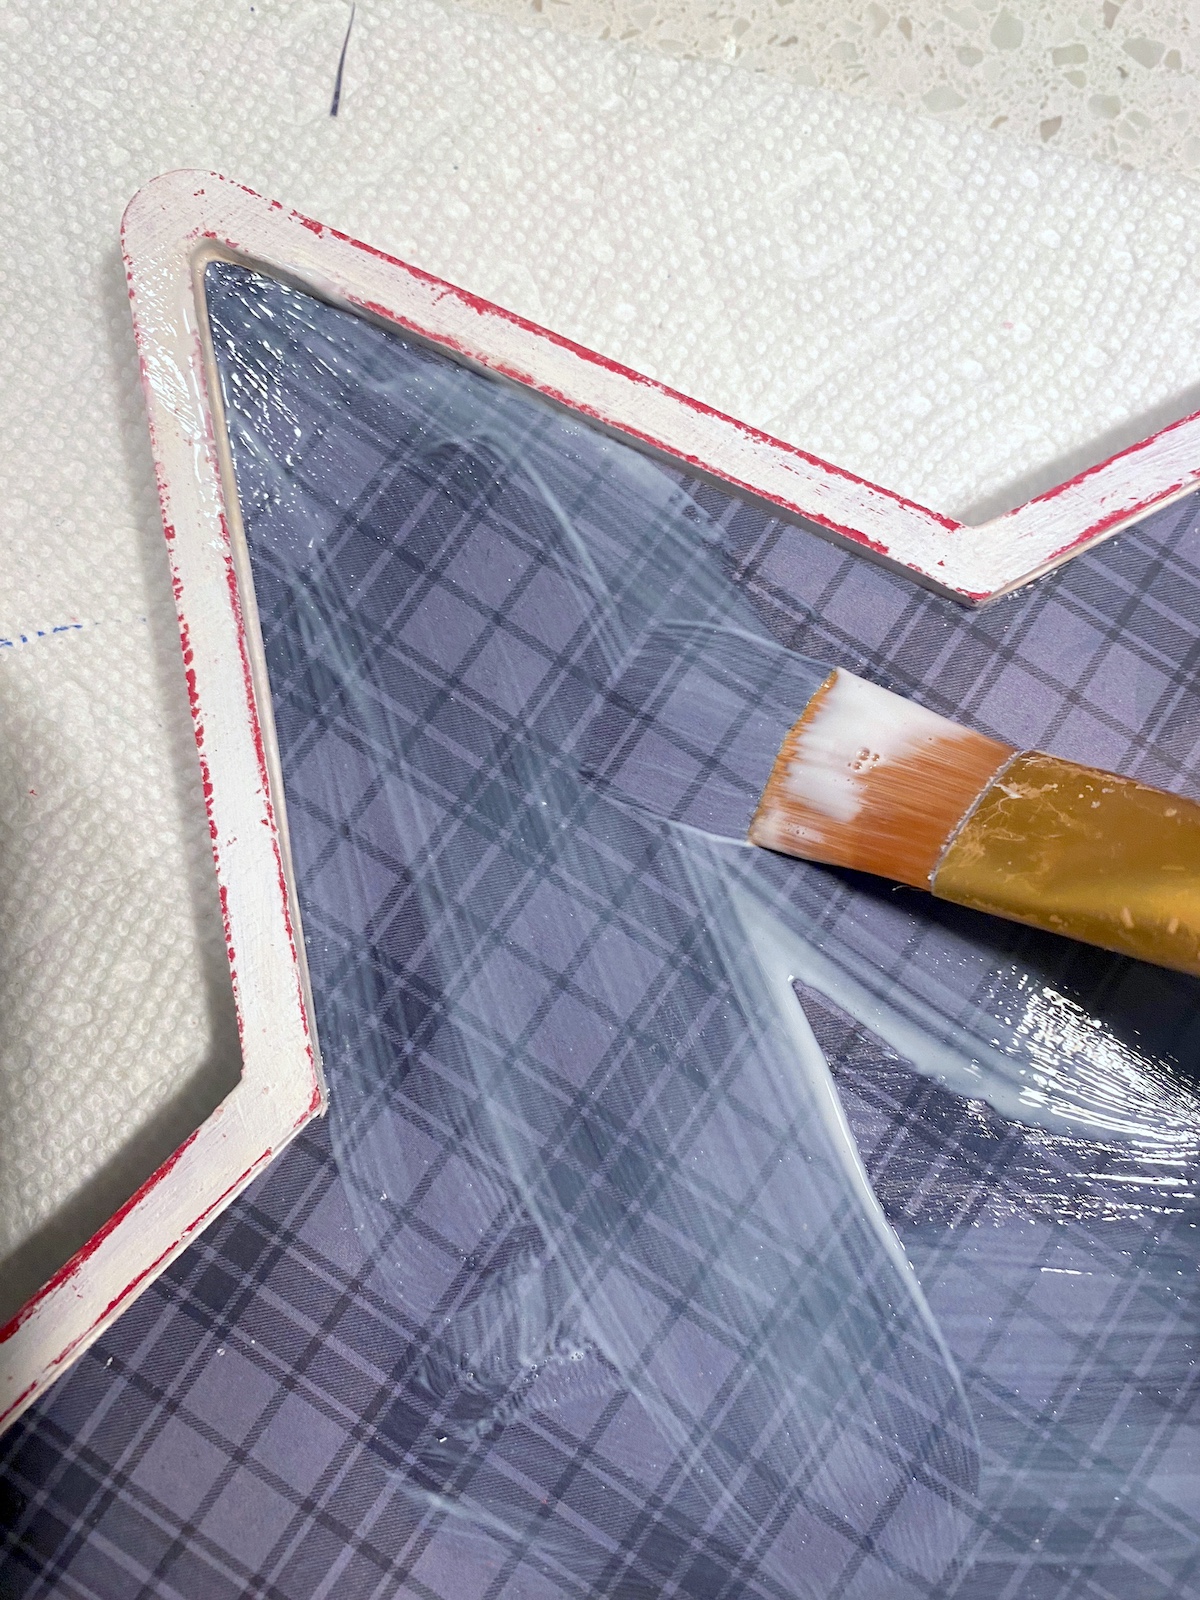 Applying Mod Podge to the top of the plaid paper